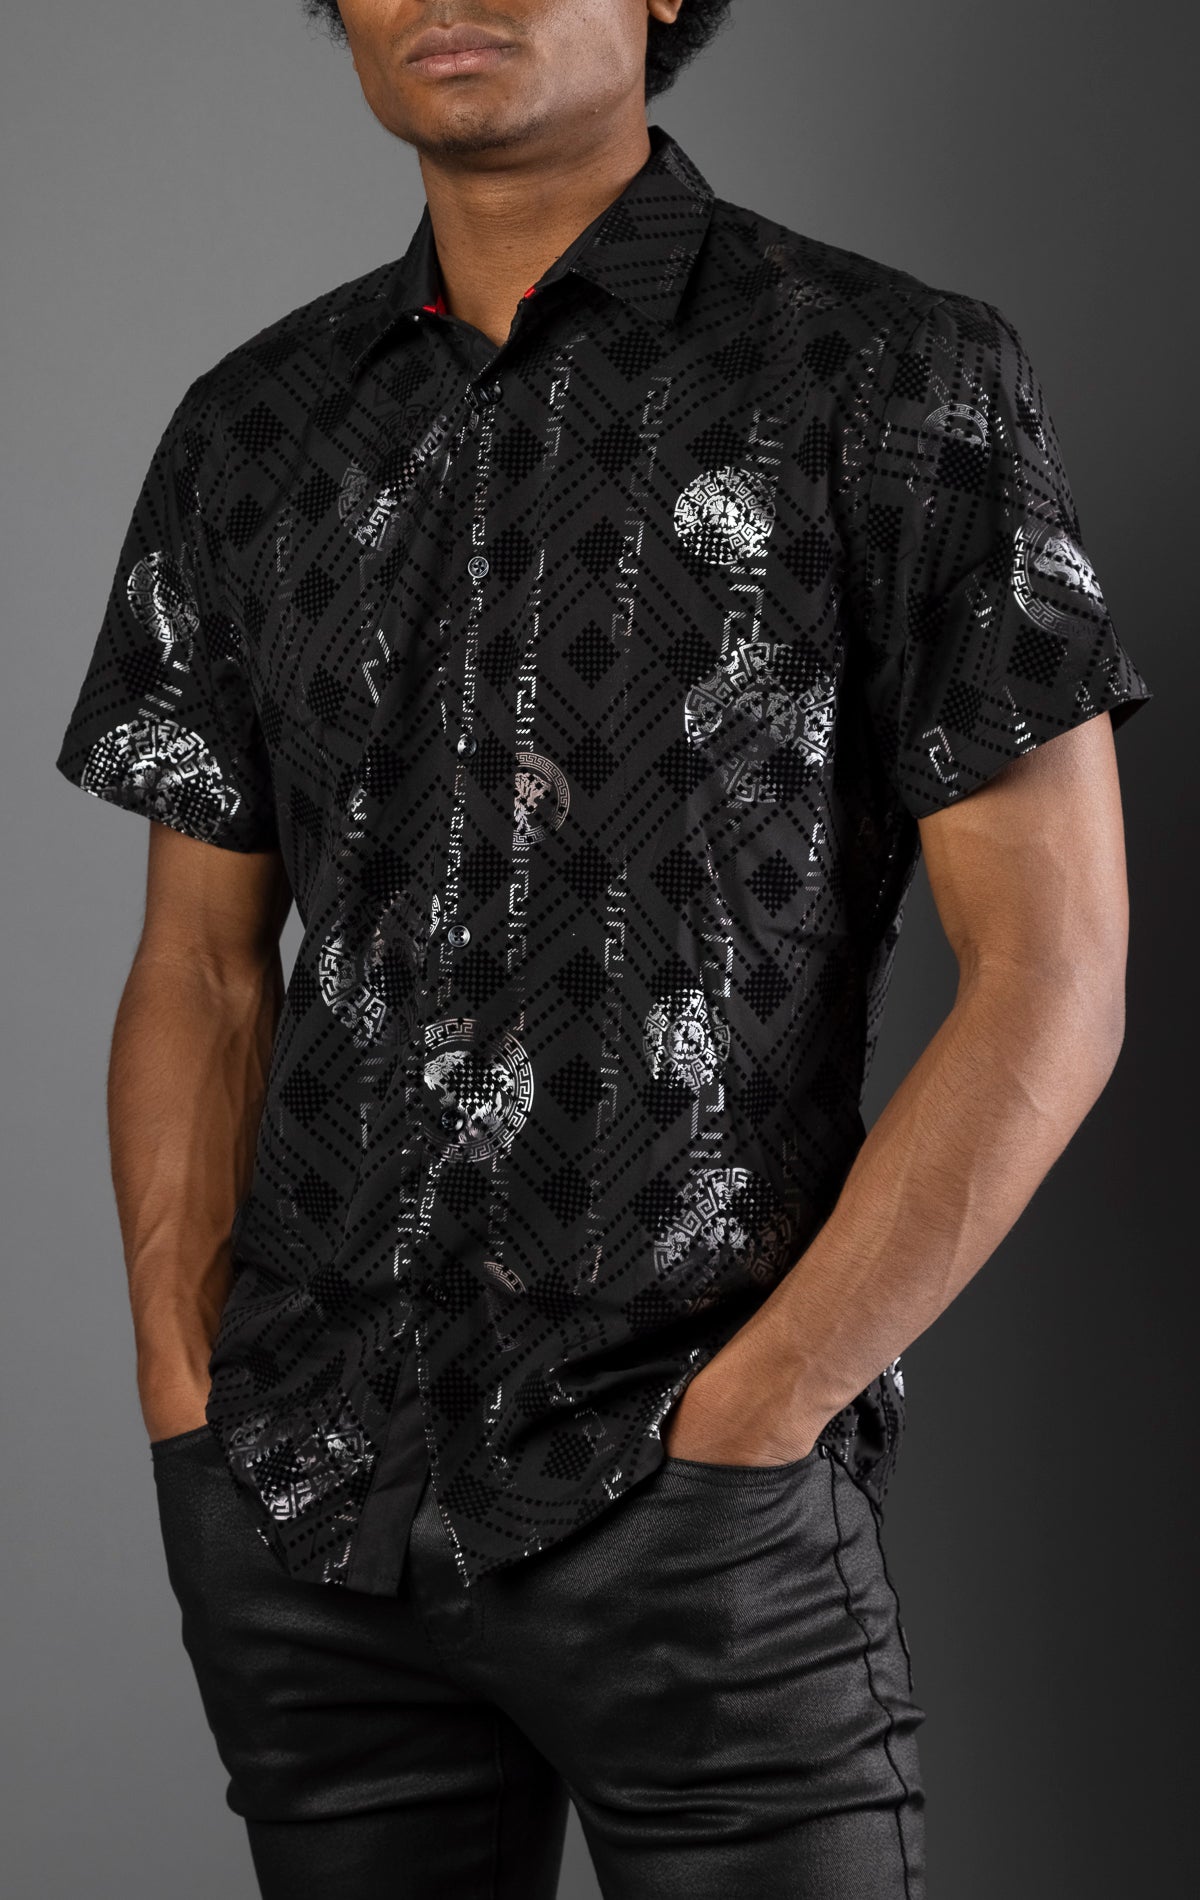 black Men's casual, relaxed-fit button-down shirt with a short sleeve design. The shirt features an all-over Greek key pattern and a front button closure.